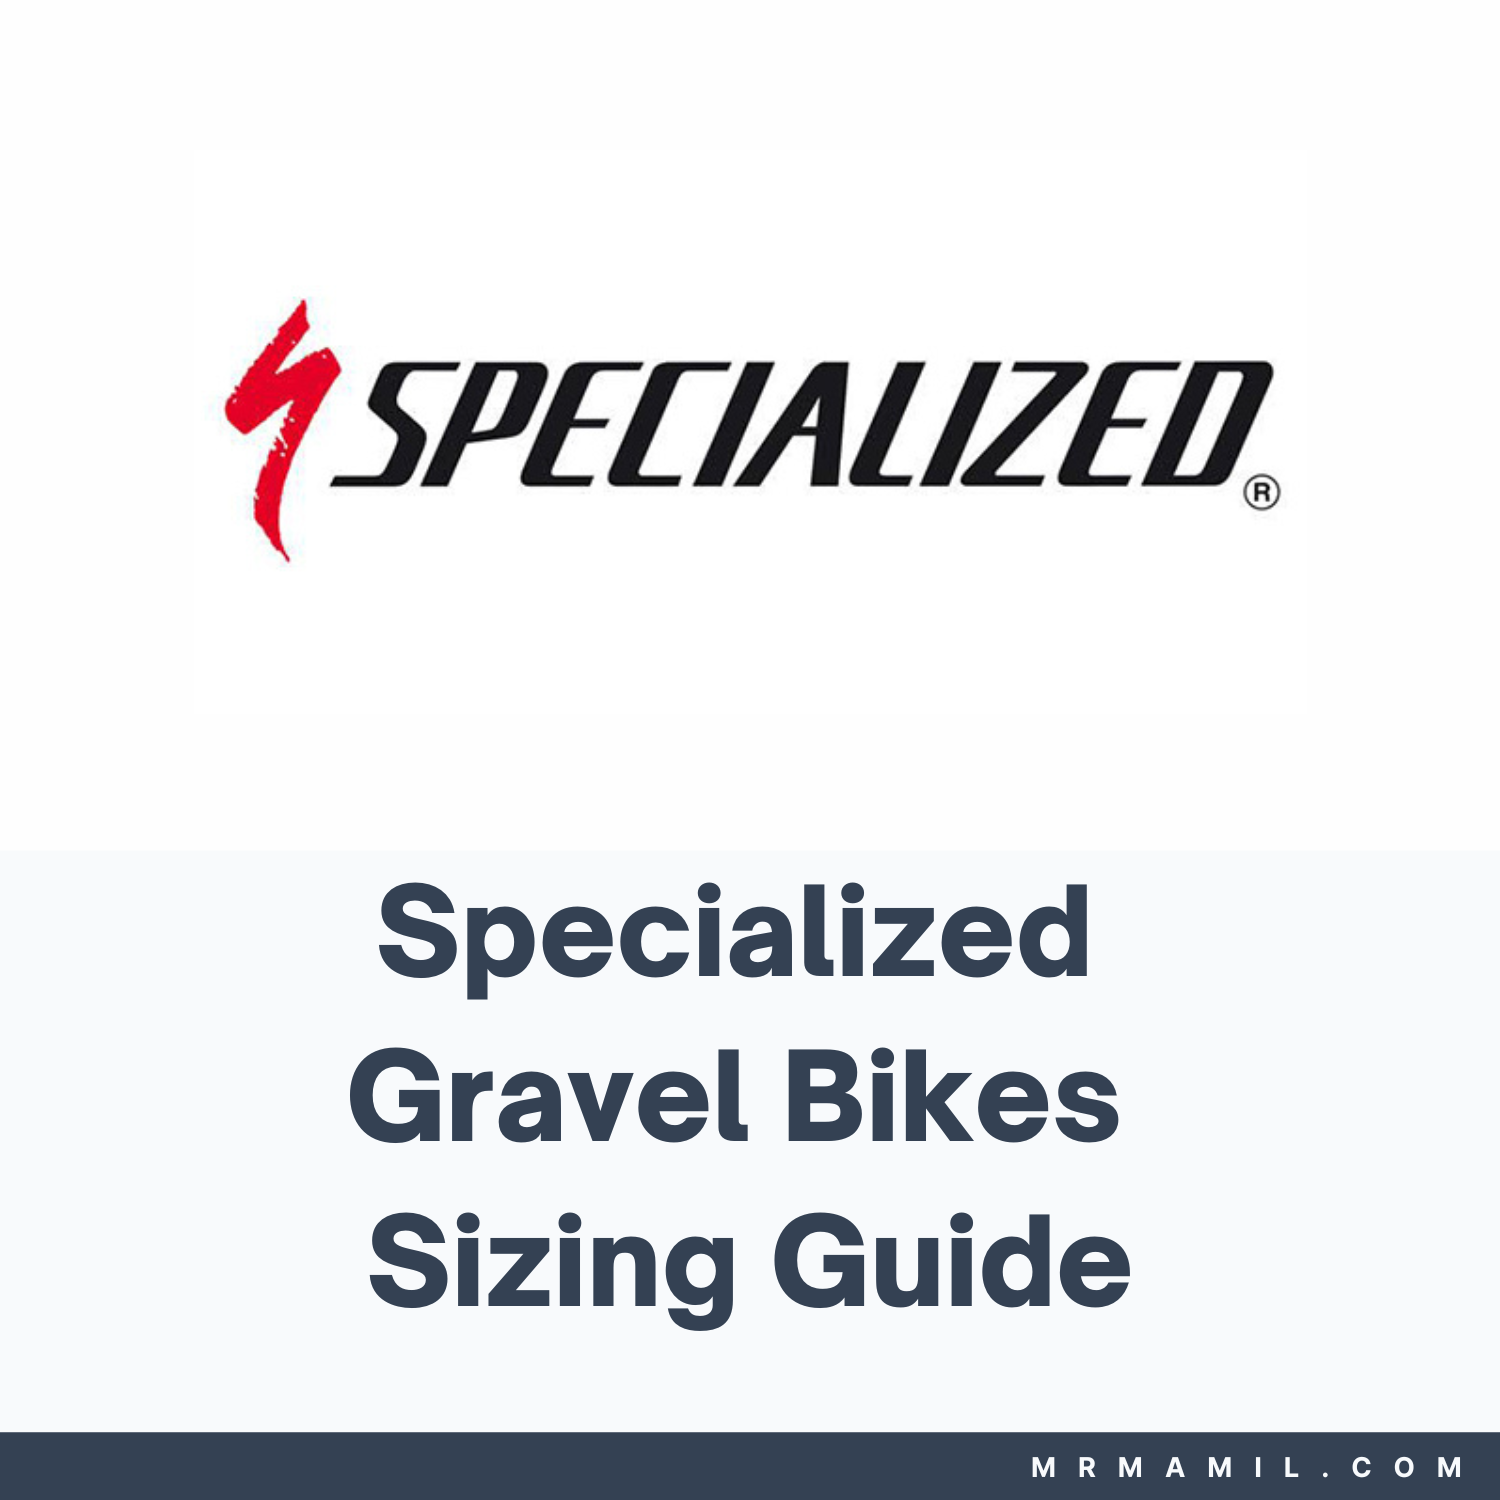 Specialized Gravel Bikes Sizing Guide